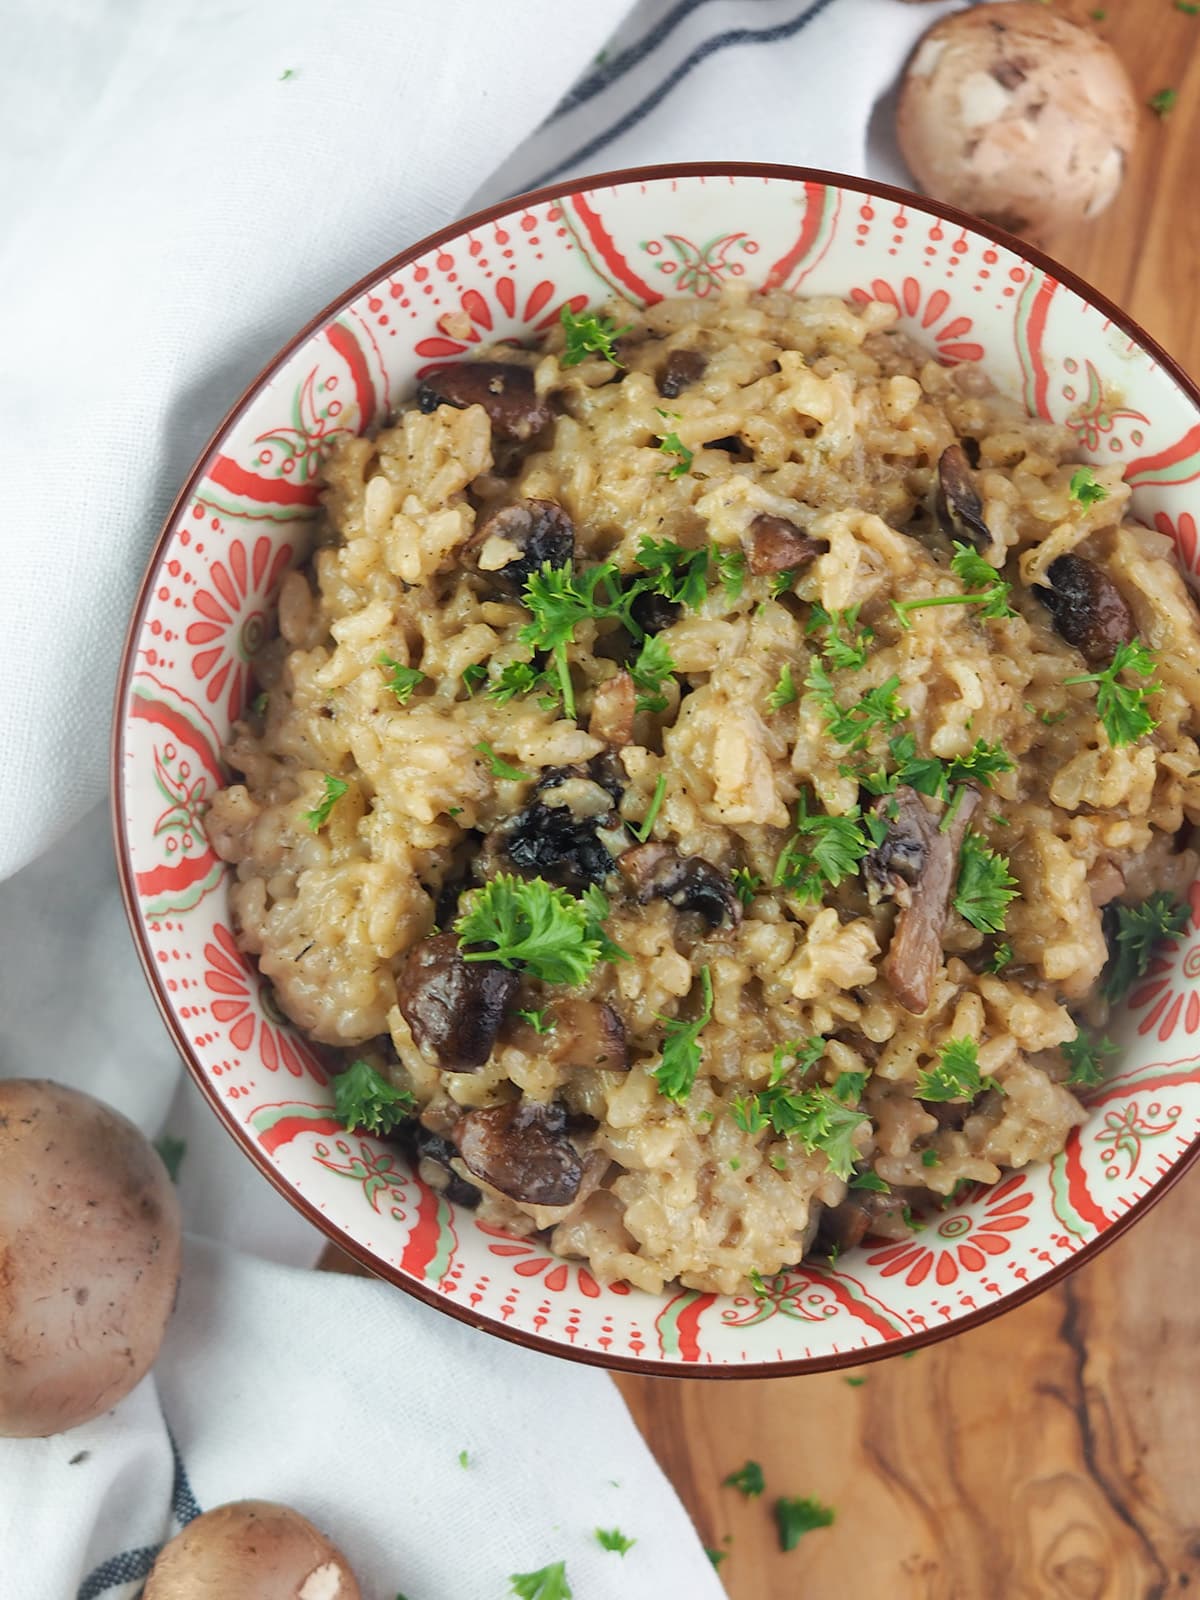 mushroom risotto in bowl with red and green designs